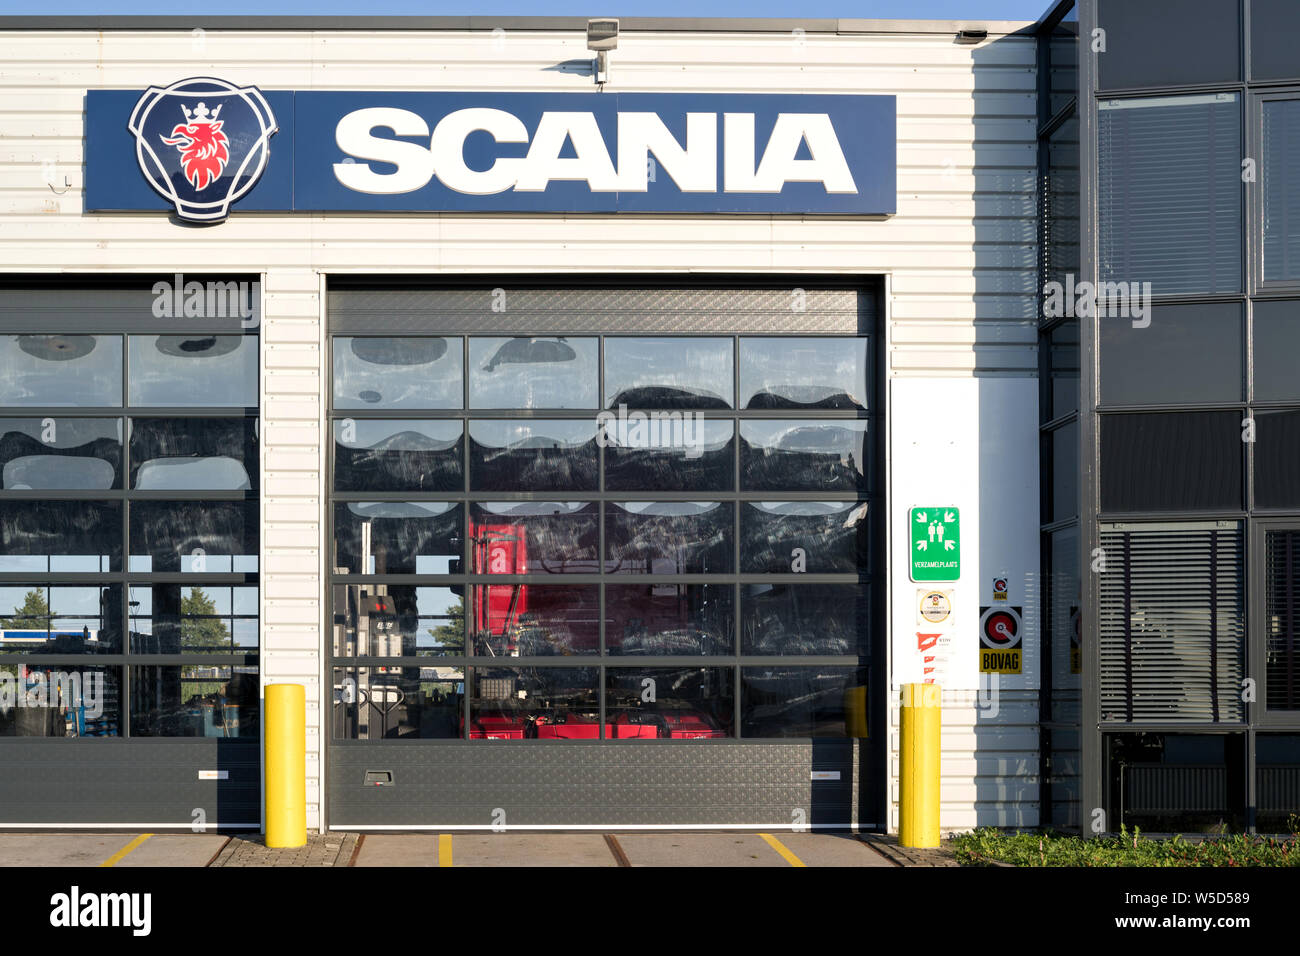 Scania garage in Sassenheim, The Netherlands. Scania AB is a major Swedish manufacturer of commercial vehicles. Stock Photo